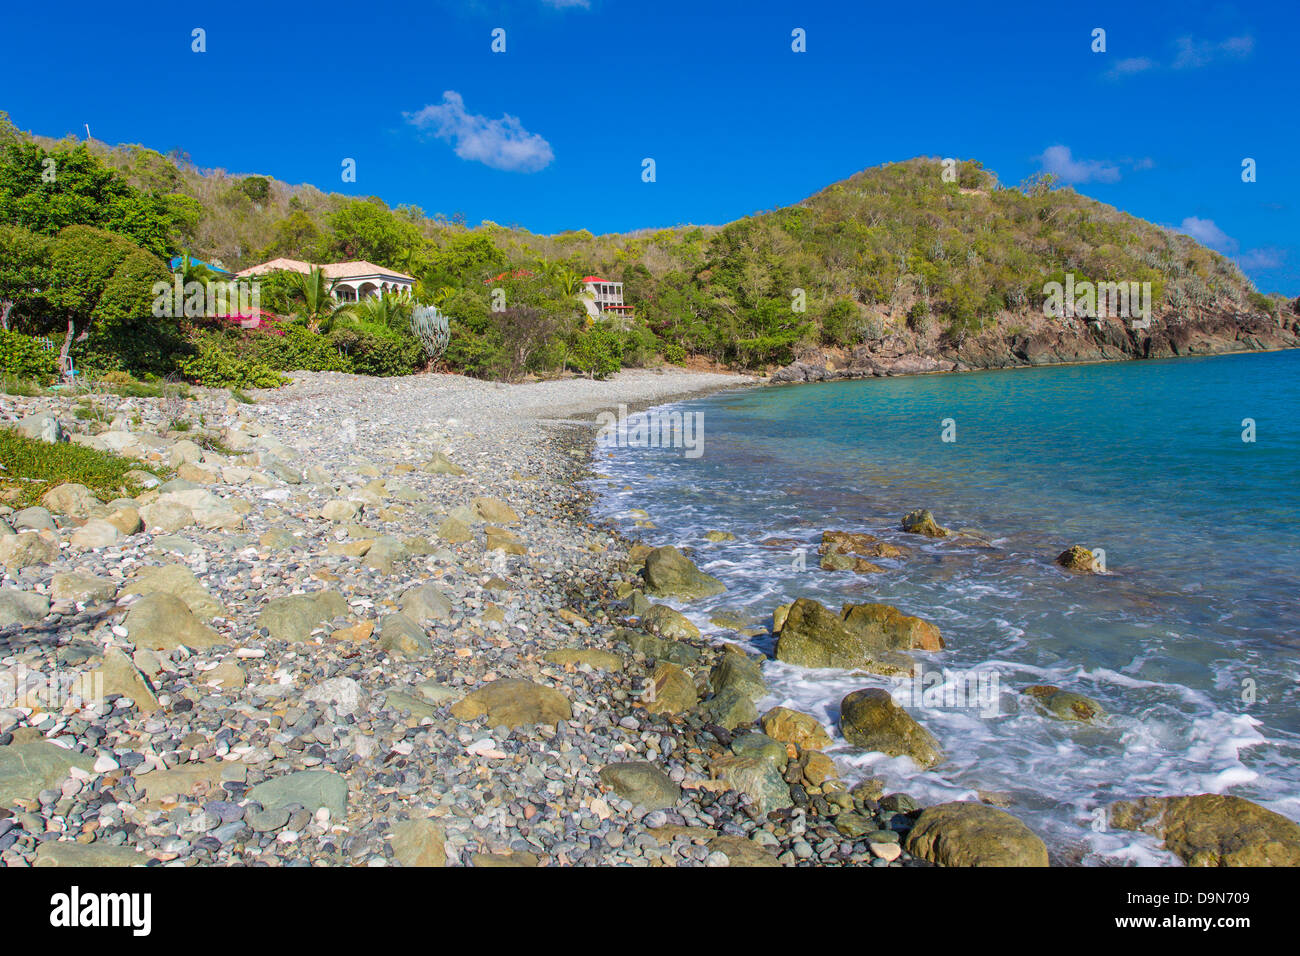 Klein Bay part of Rendezvous Bay on the Caribbean Island of St John in the US Virgin Islands Stock Photo